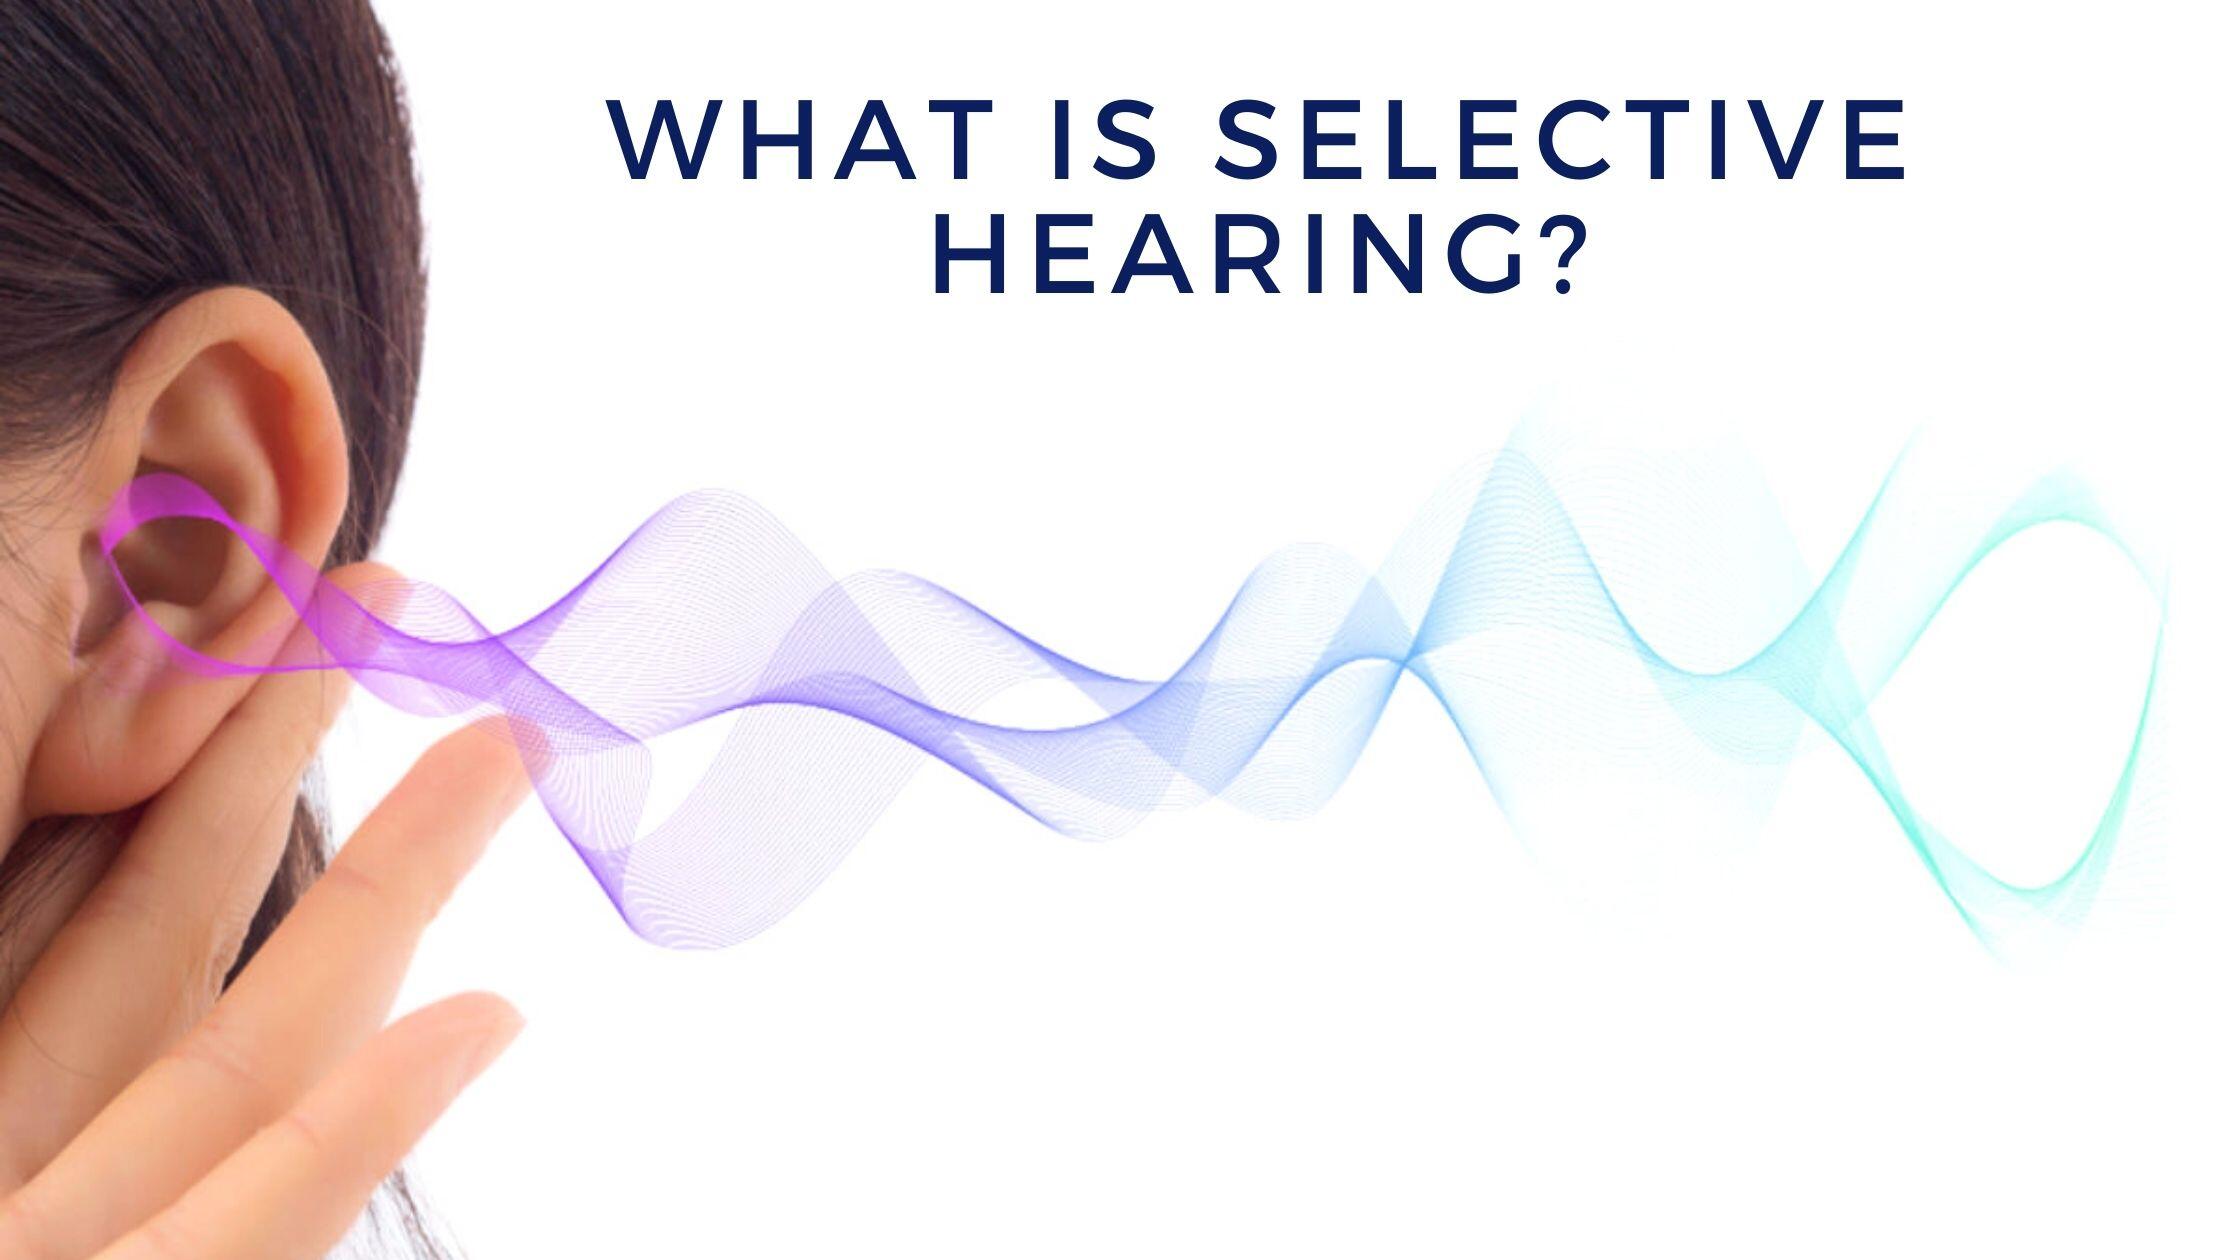 What is Selective Hearing?